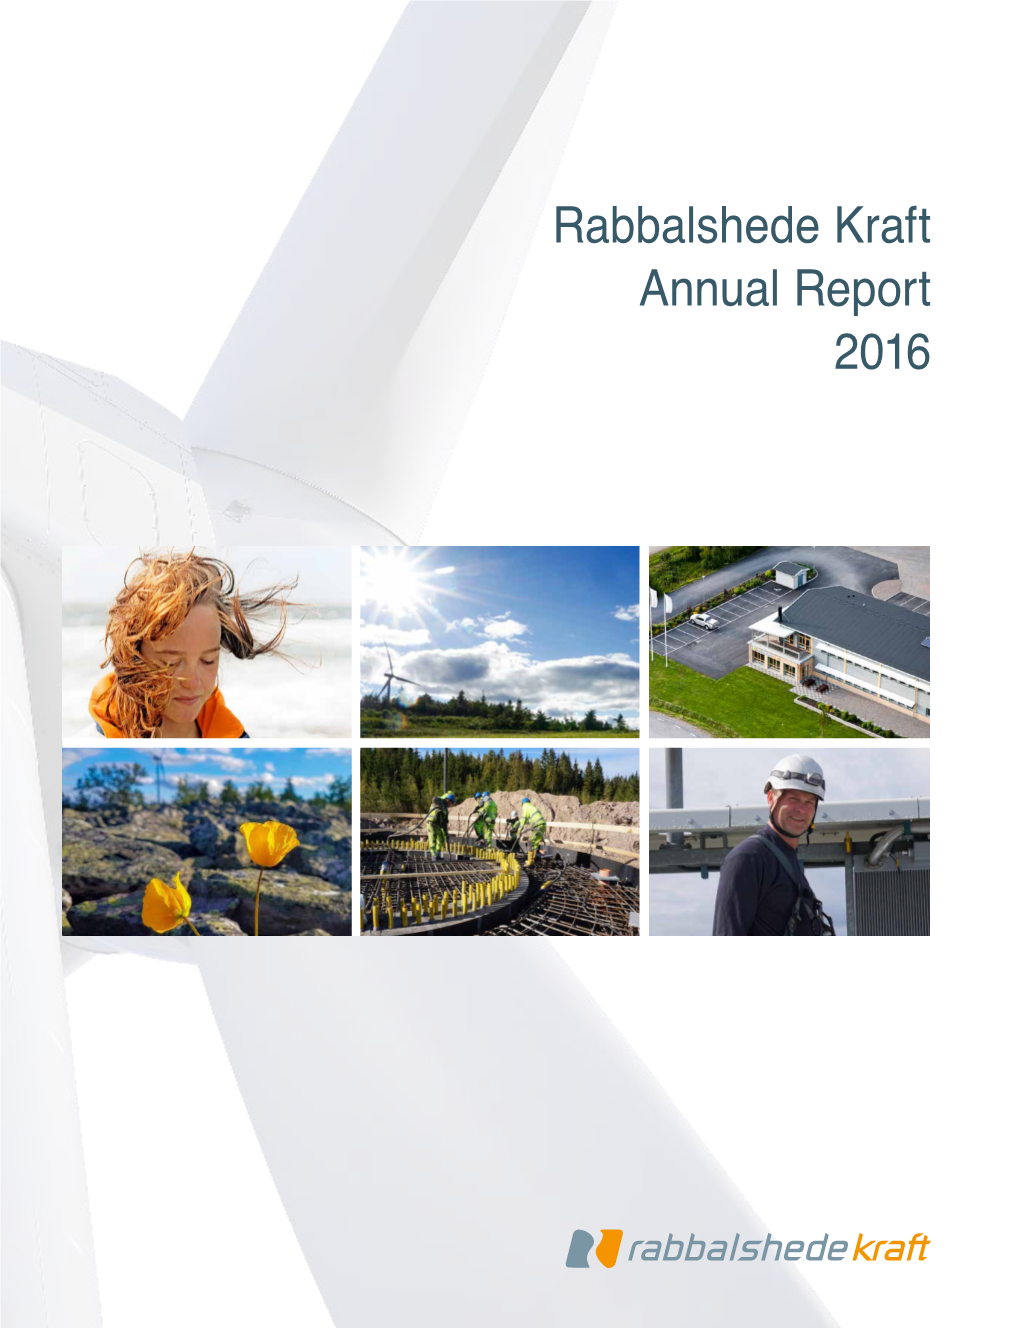 Rabbalshede Kraft Annual Report 2016 CONTENTS